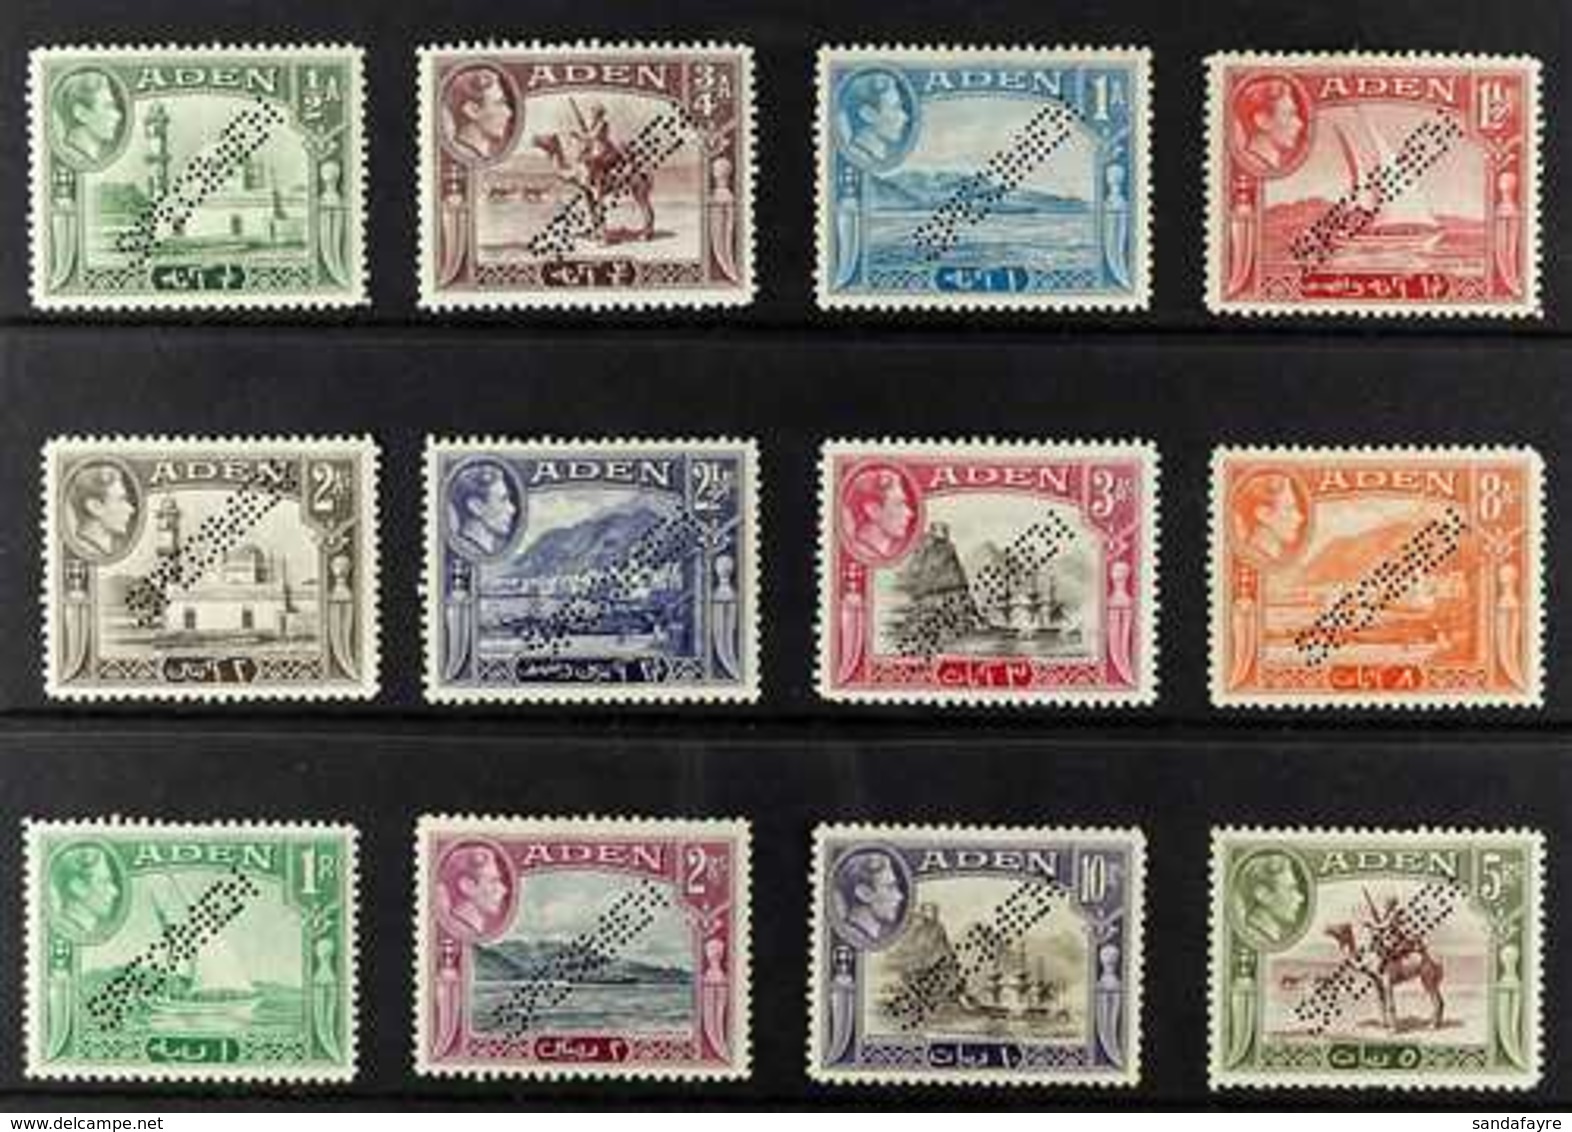 1939 Pictorials Original Set Of 12 Perforated "SPECIMEN", SG 16s-27s, Mint, Fresh Colours. (12 Stamps) For More Images,  - Aden (1854-1963)